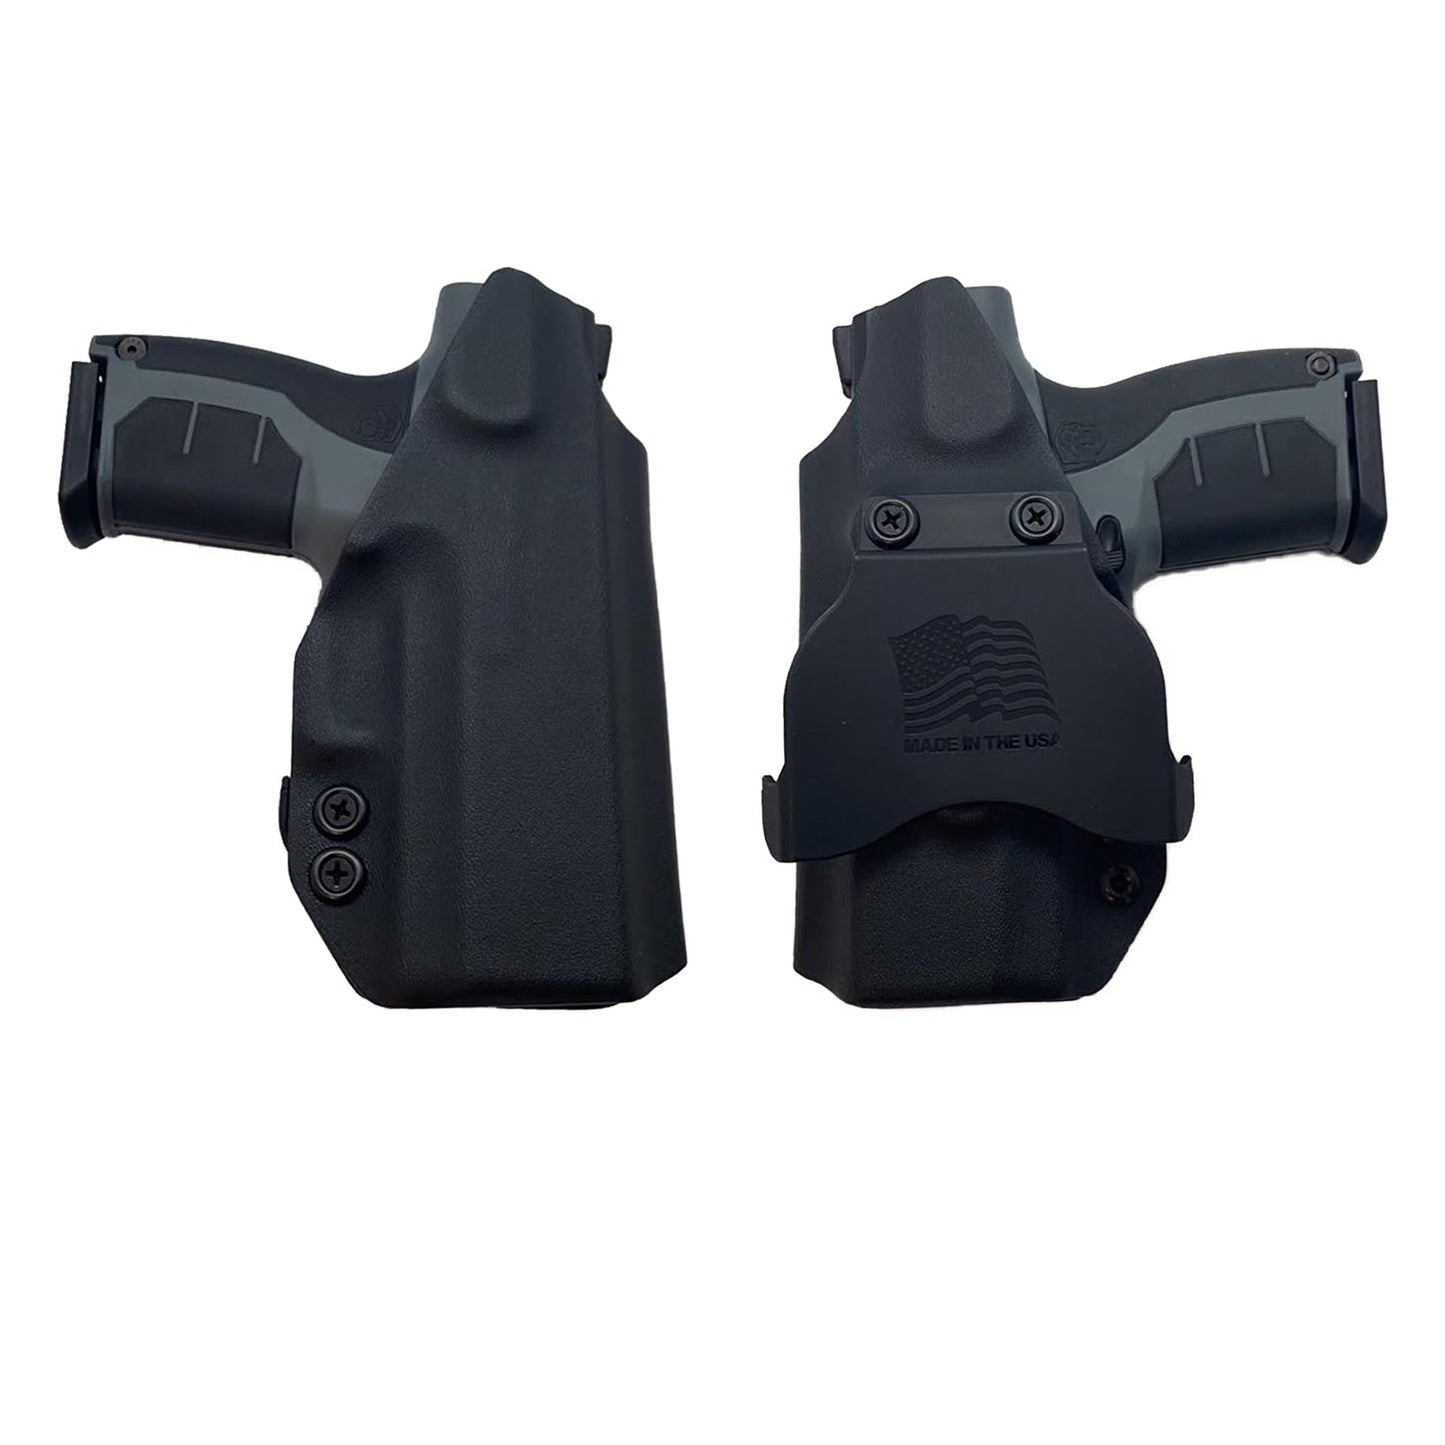 BYRNA HD/ SD With TLR7/TLR7A Light OWB (Outside Waistband Holster)